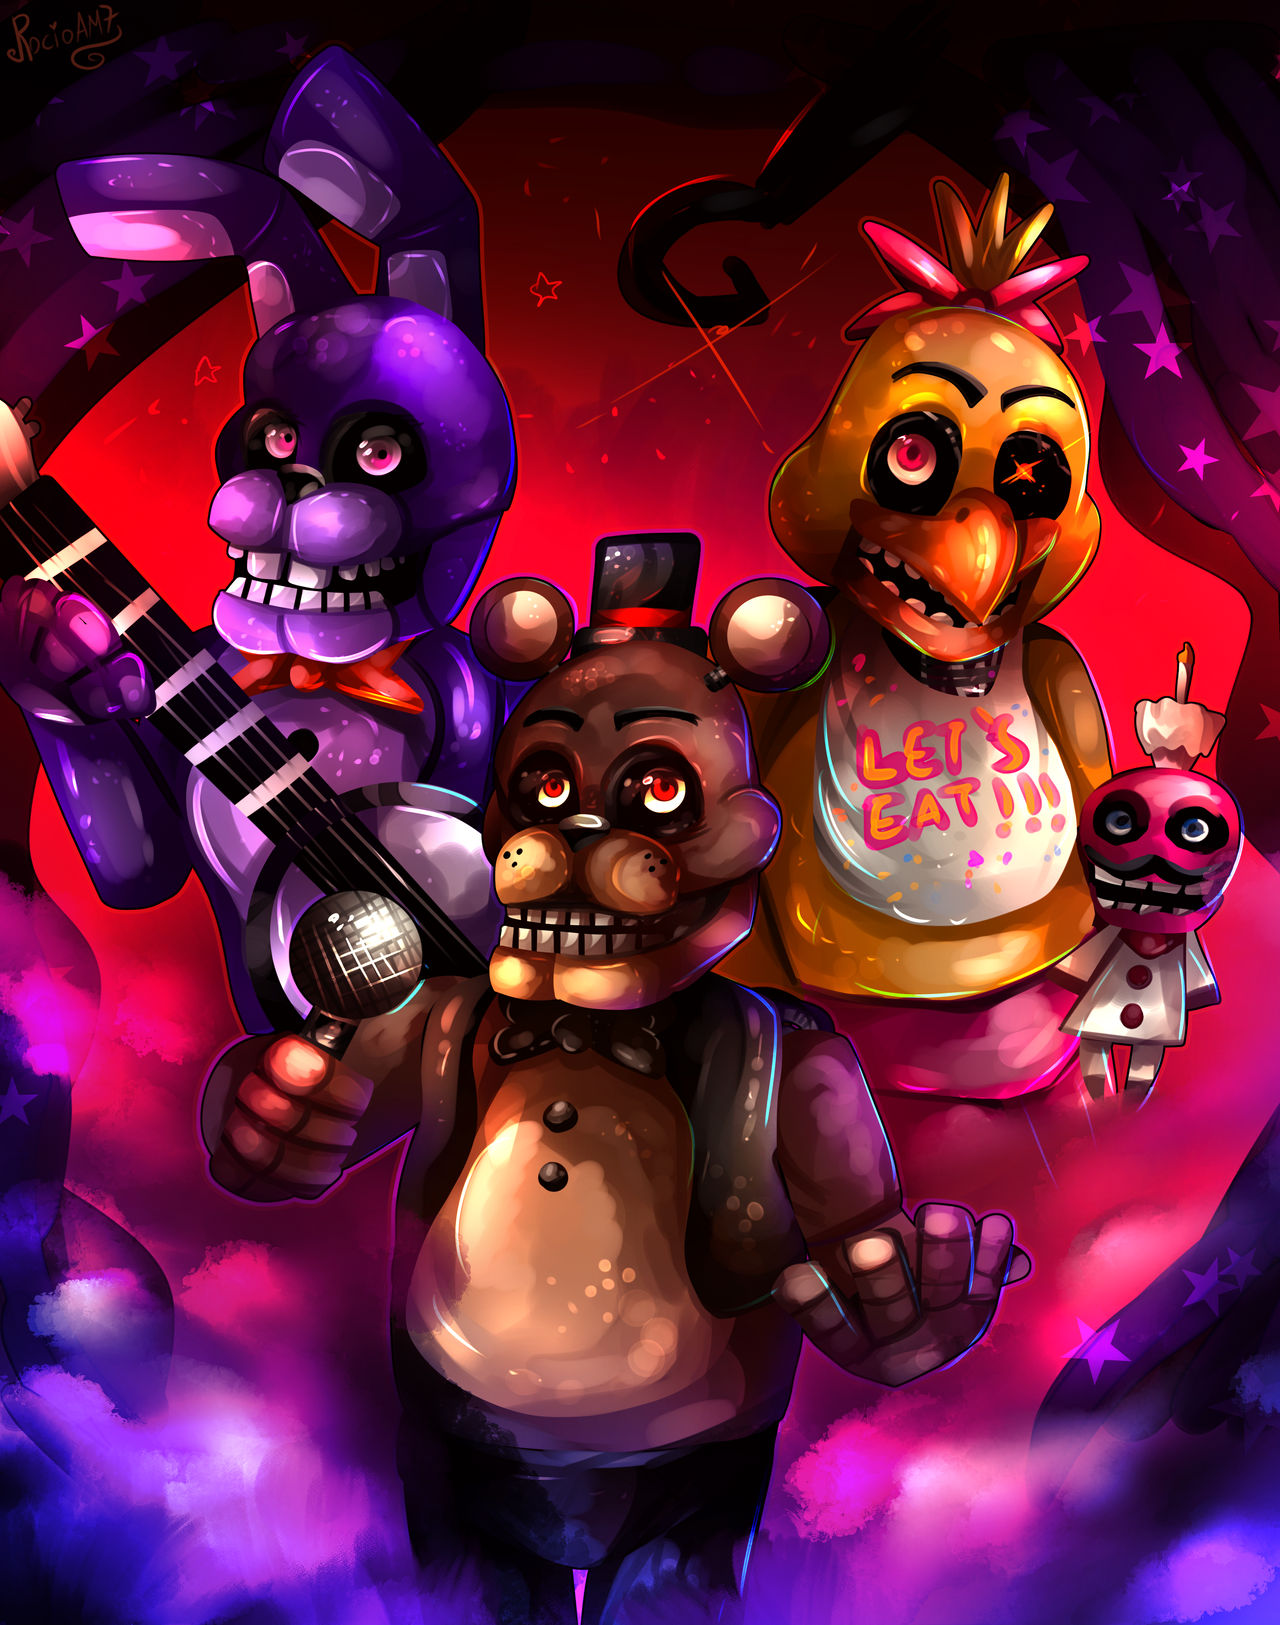 rocioam7 - — Five nights at Freddy's 4 The